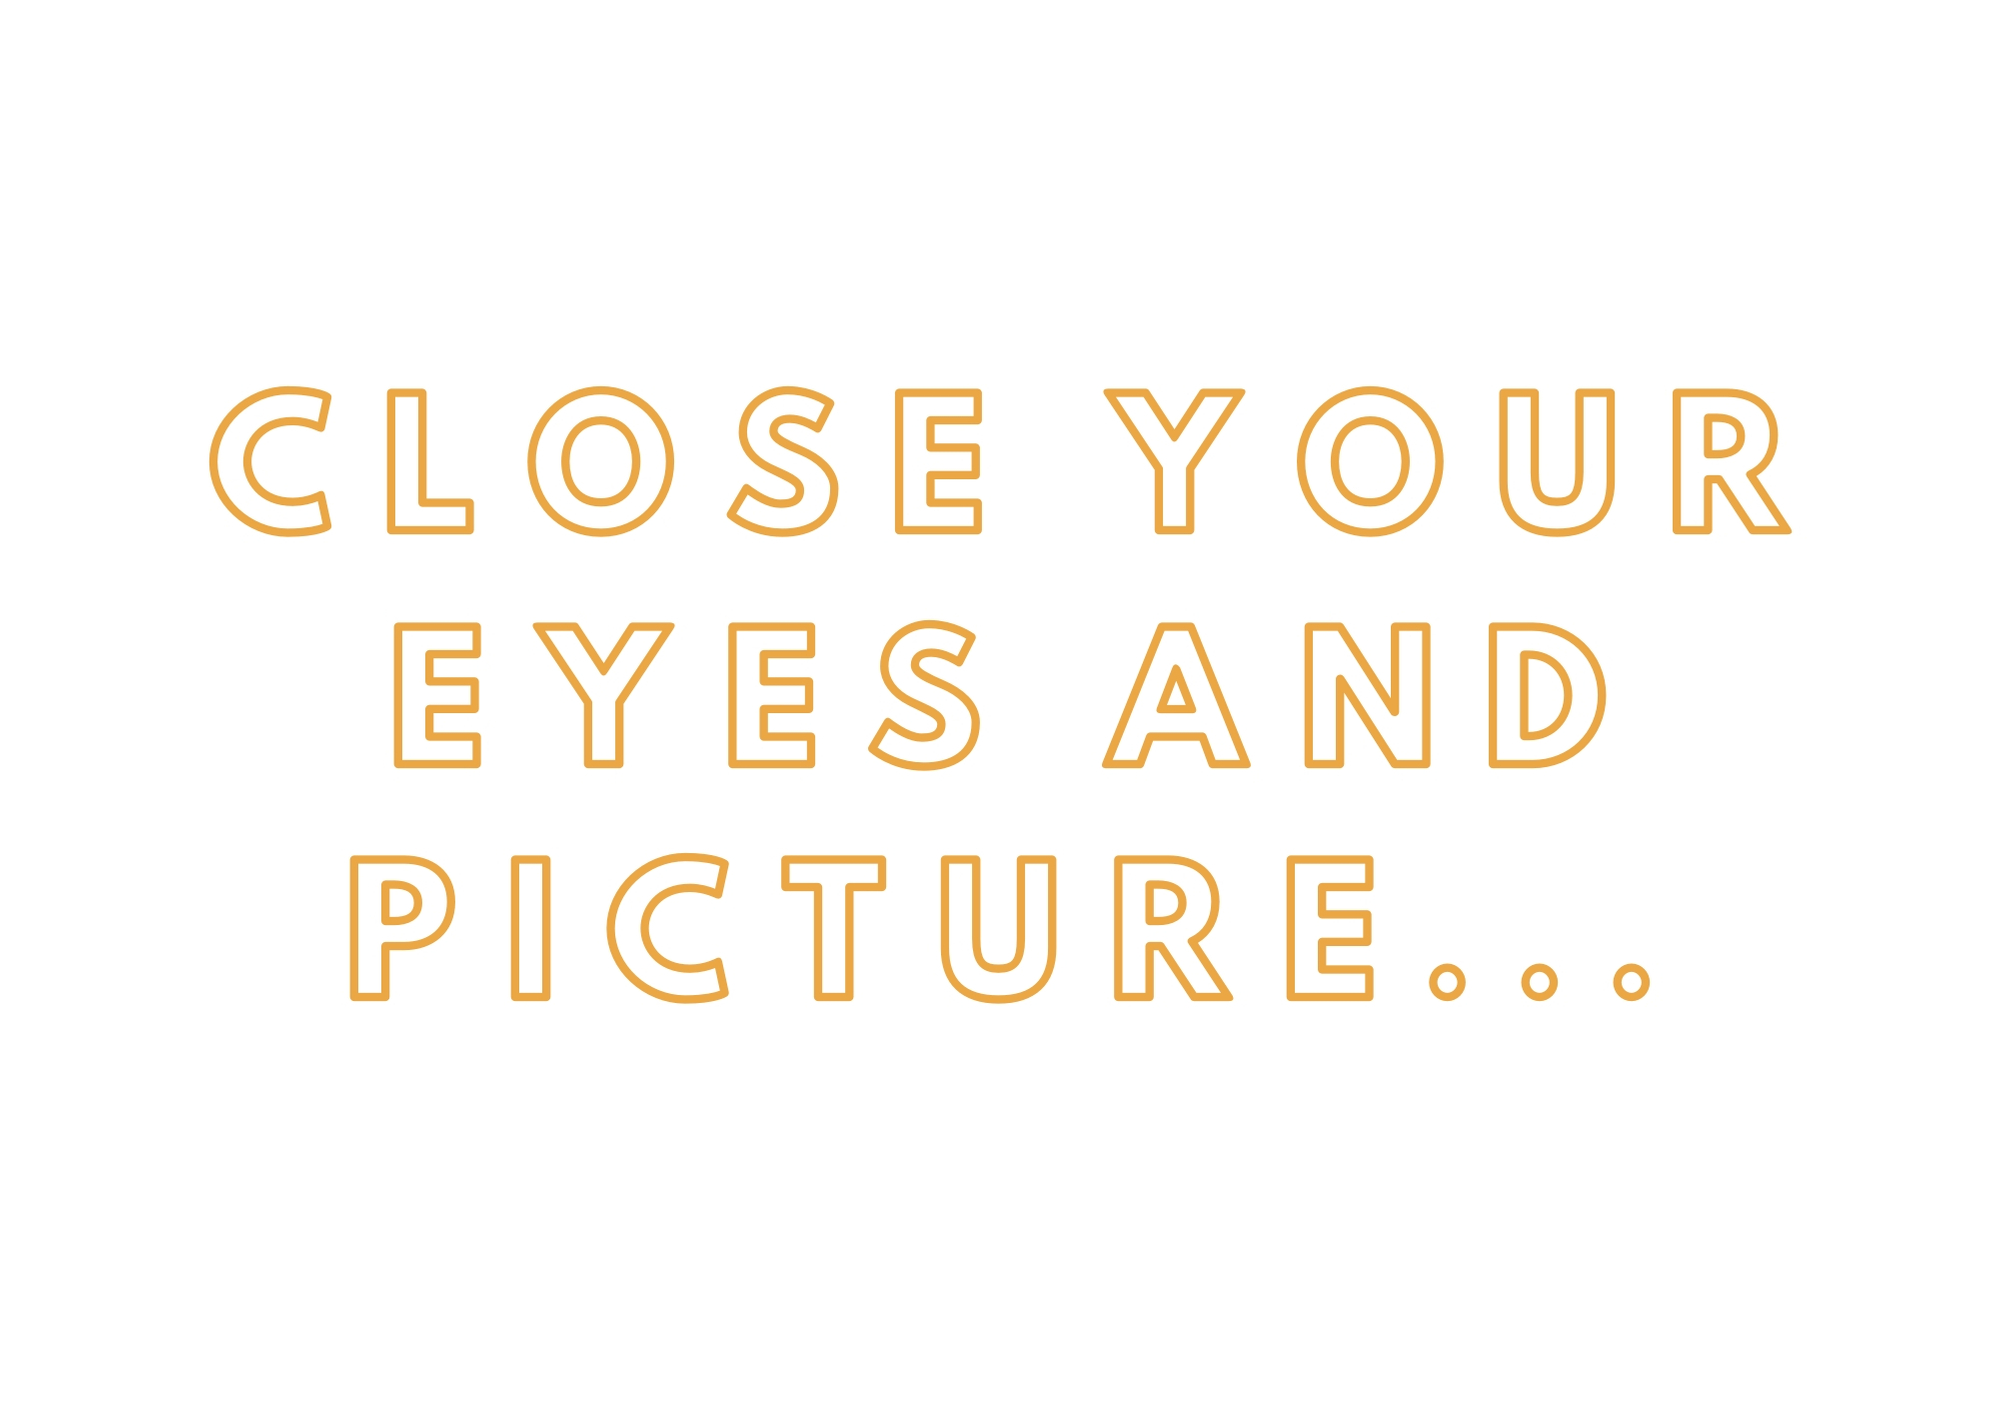 Close your eyes and imagine image